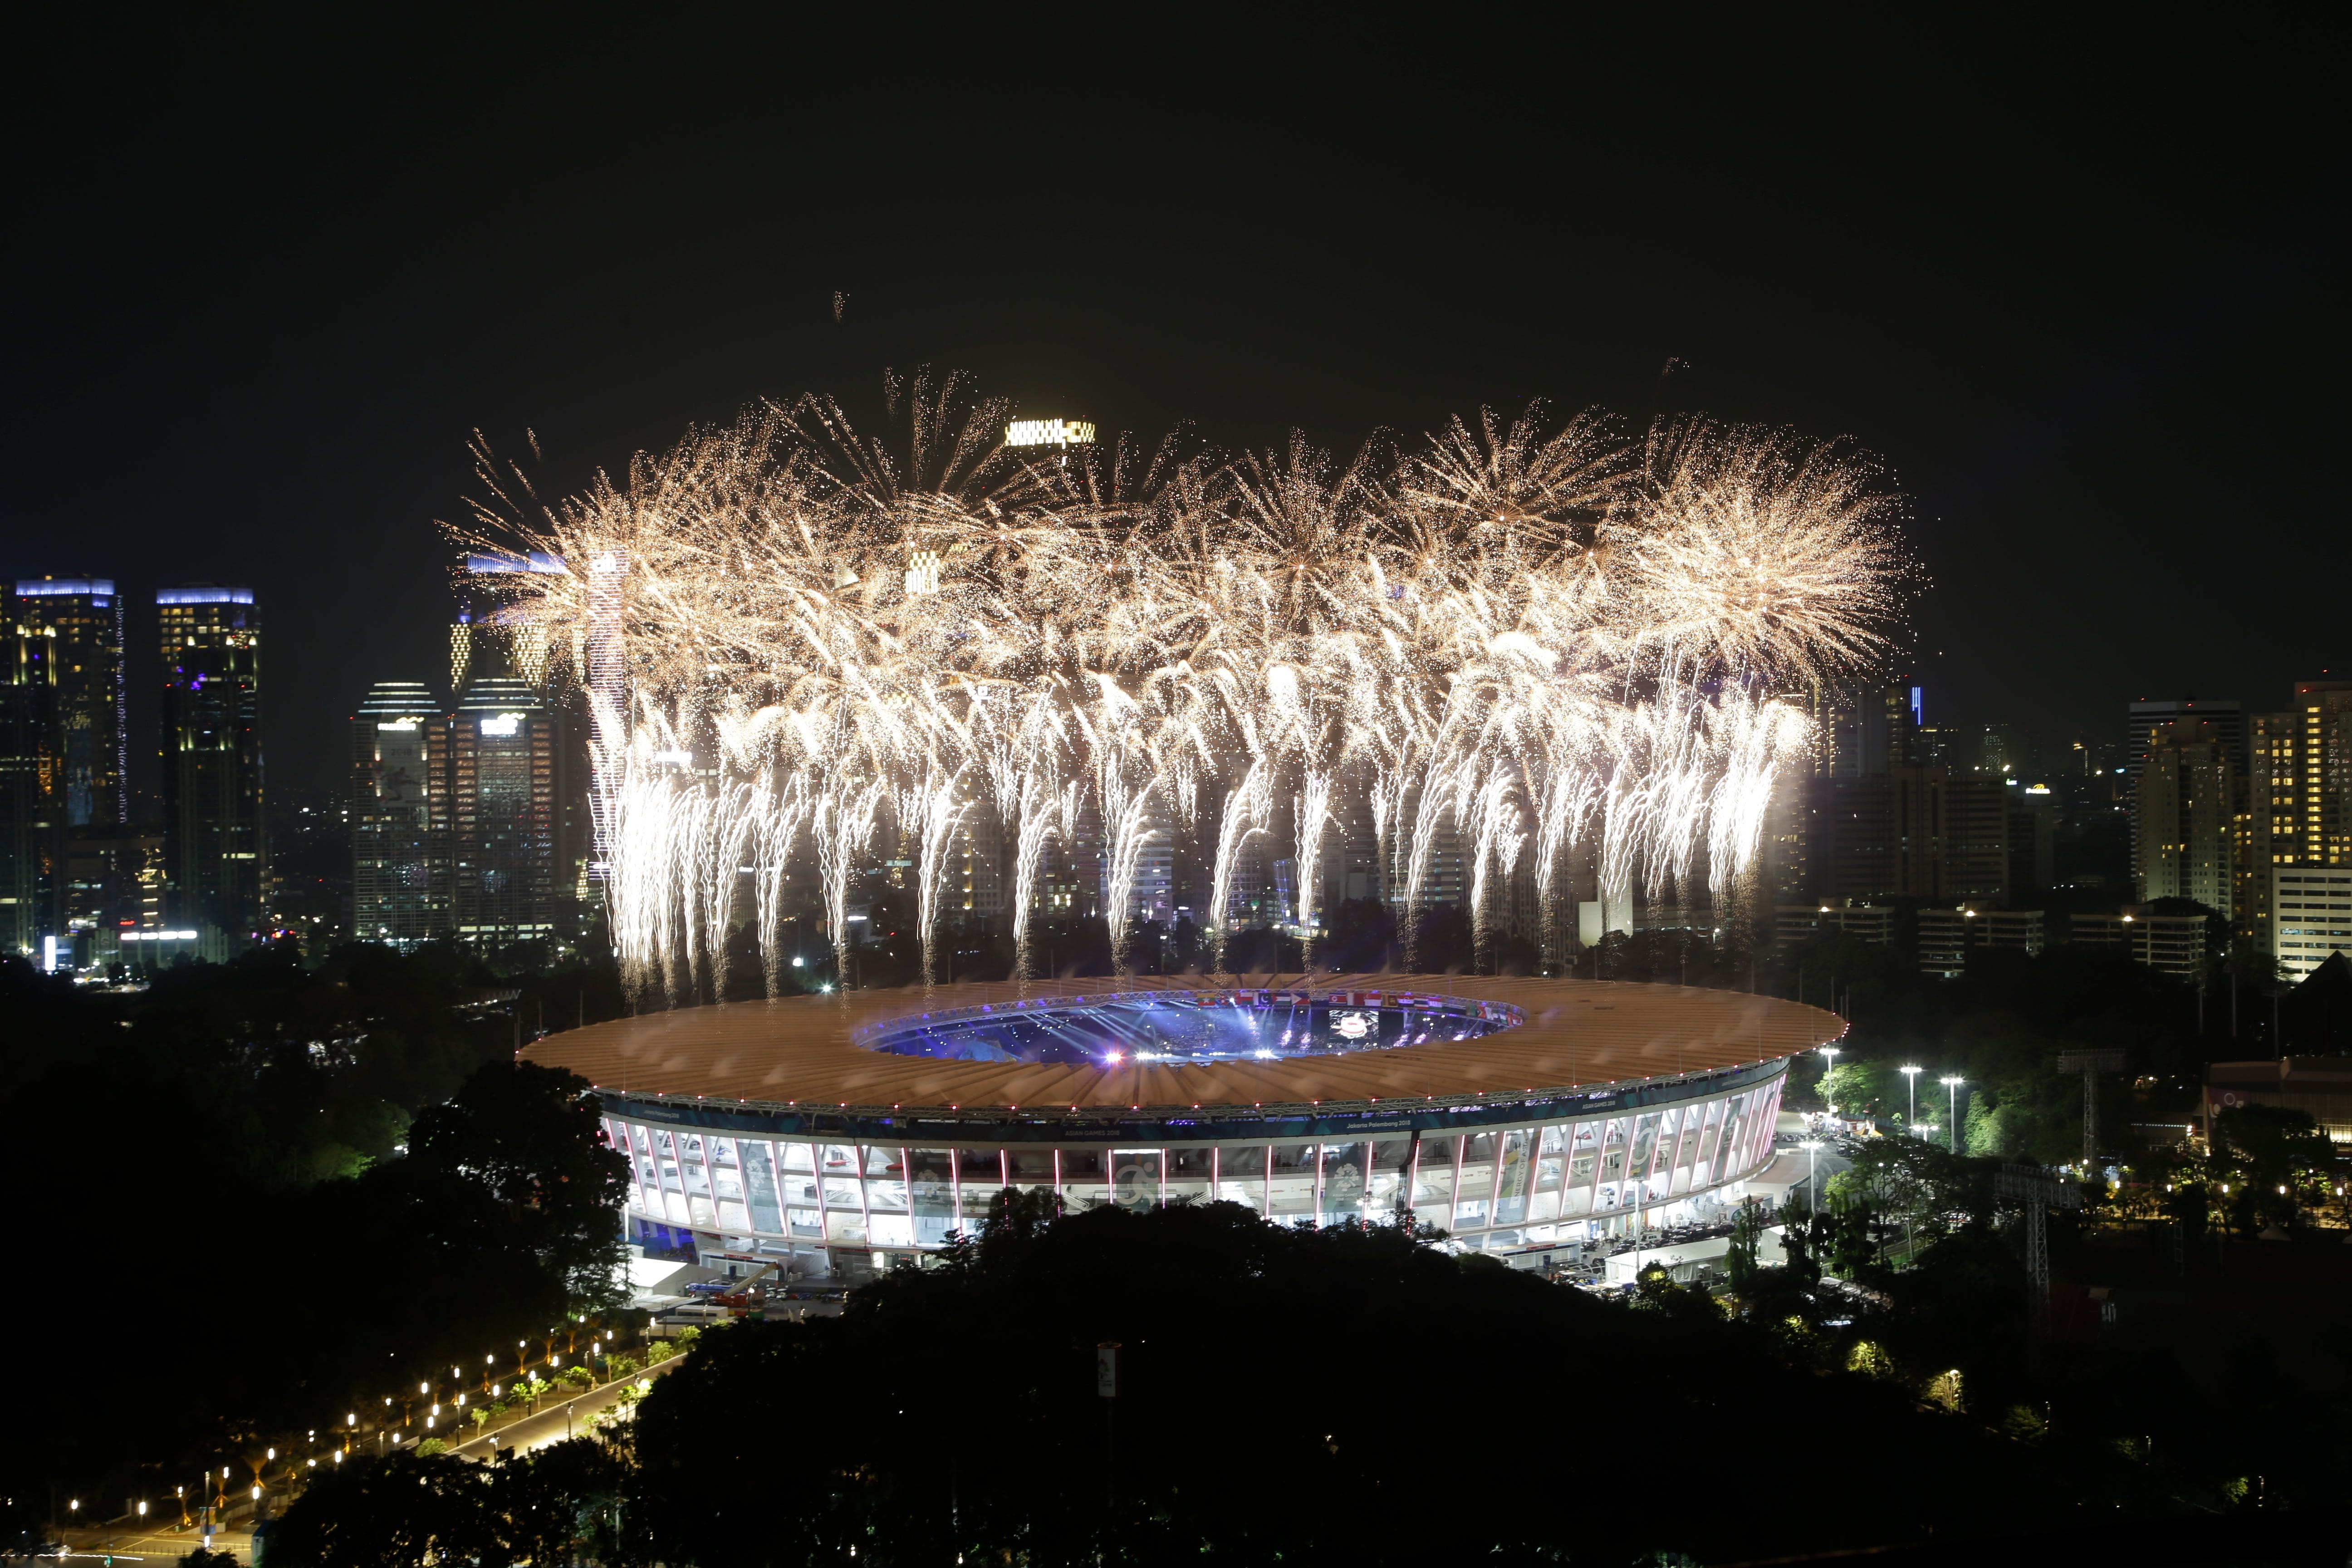 Fireworks explode over the Gelora Bung Karno Stadium during the opening ceremony for the 18th Asian Games in Jakarta, Indonesia, Aug. 18, 2018.